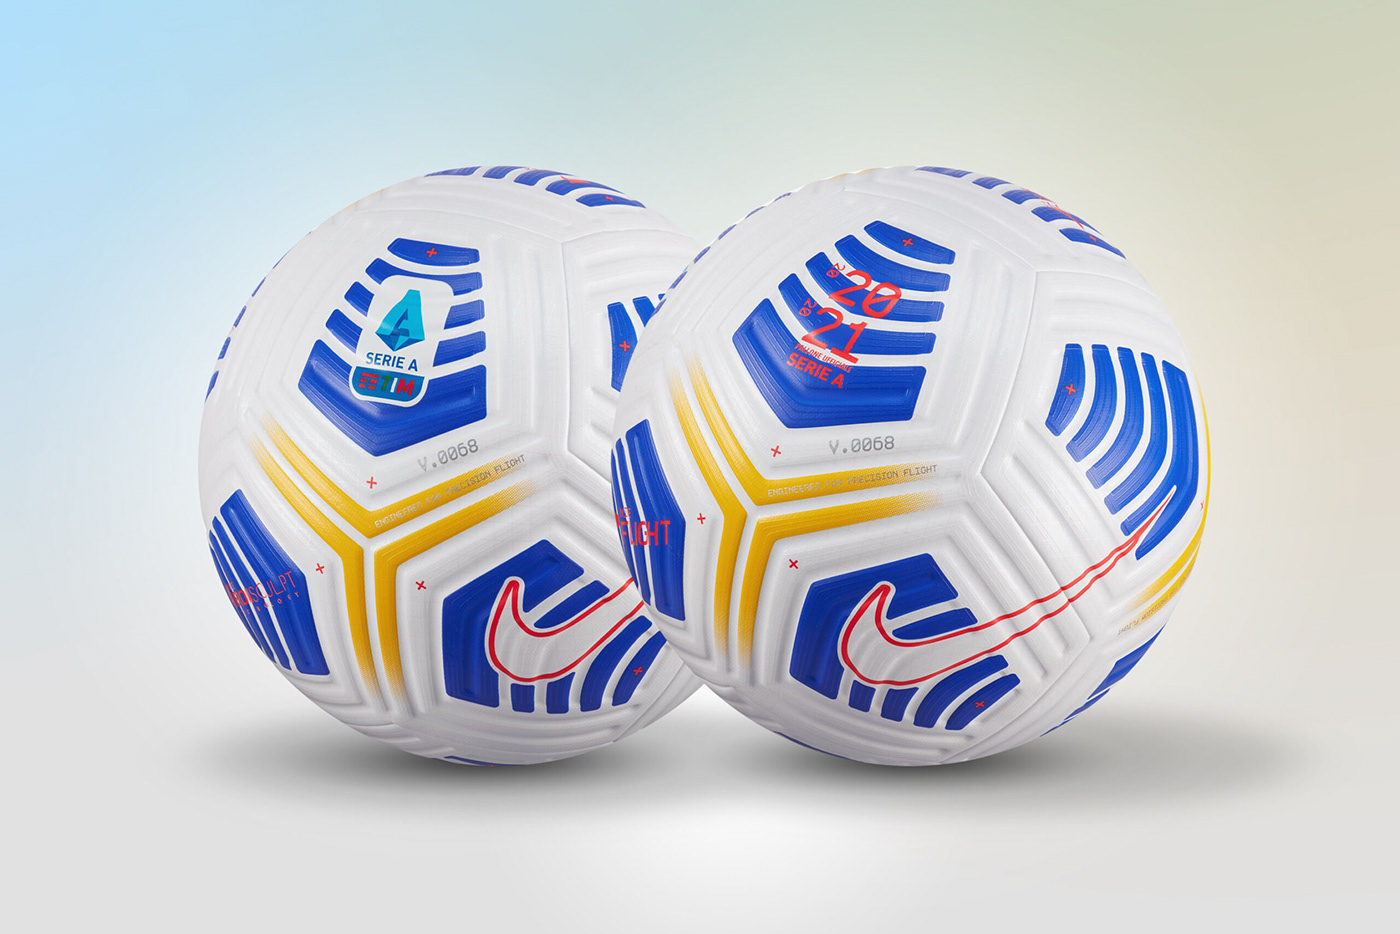 3D ball design flight football graphic industrial Nike product soccer